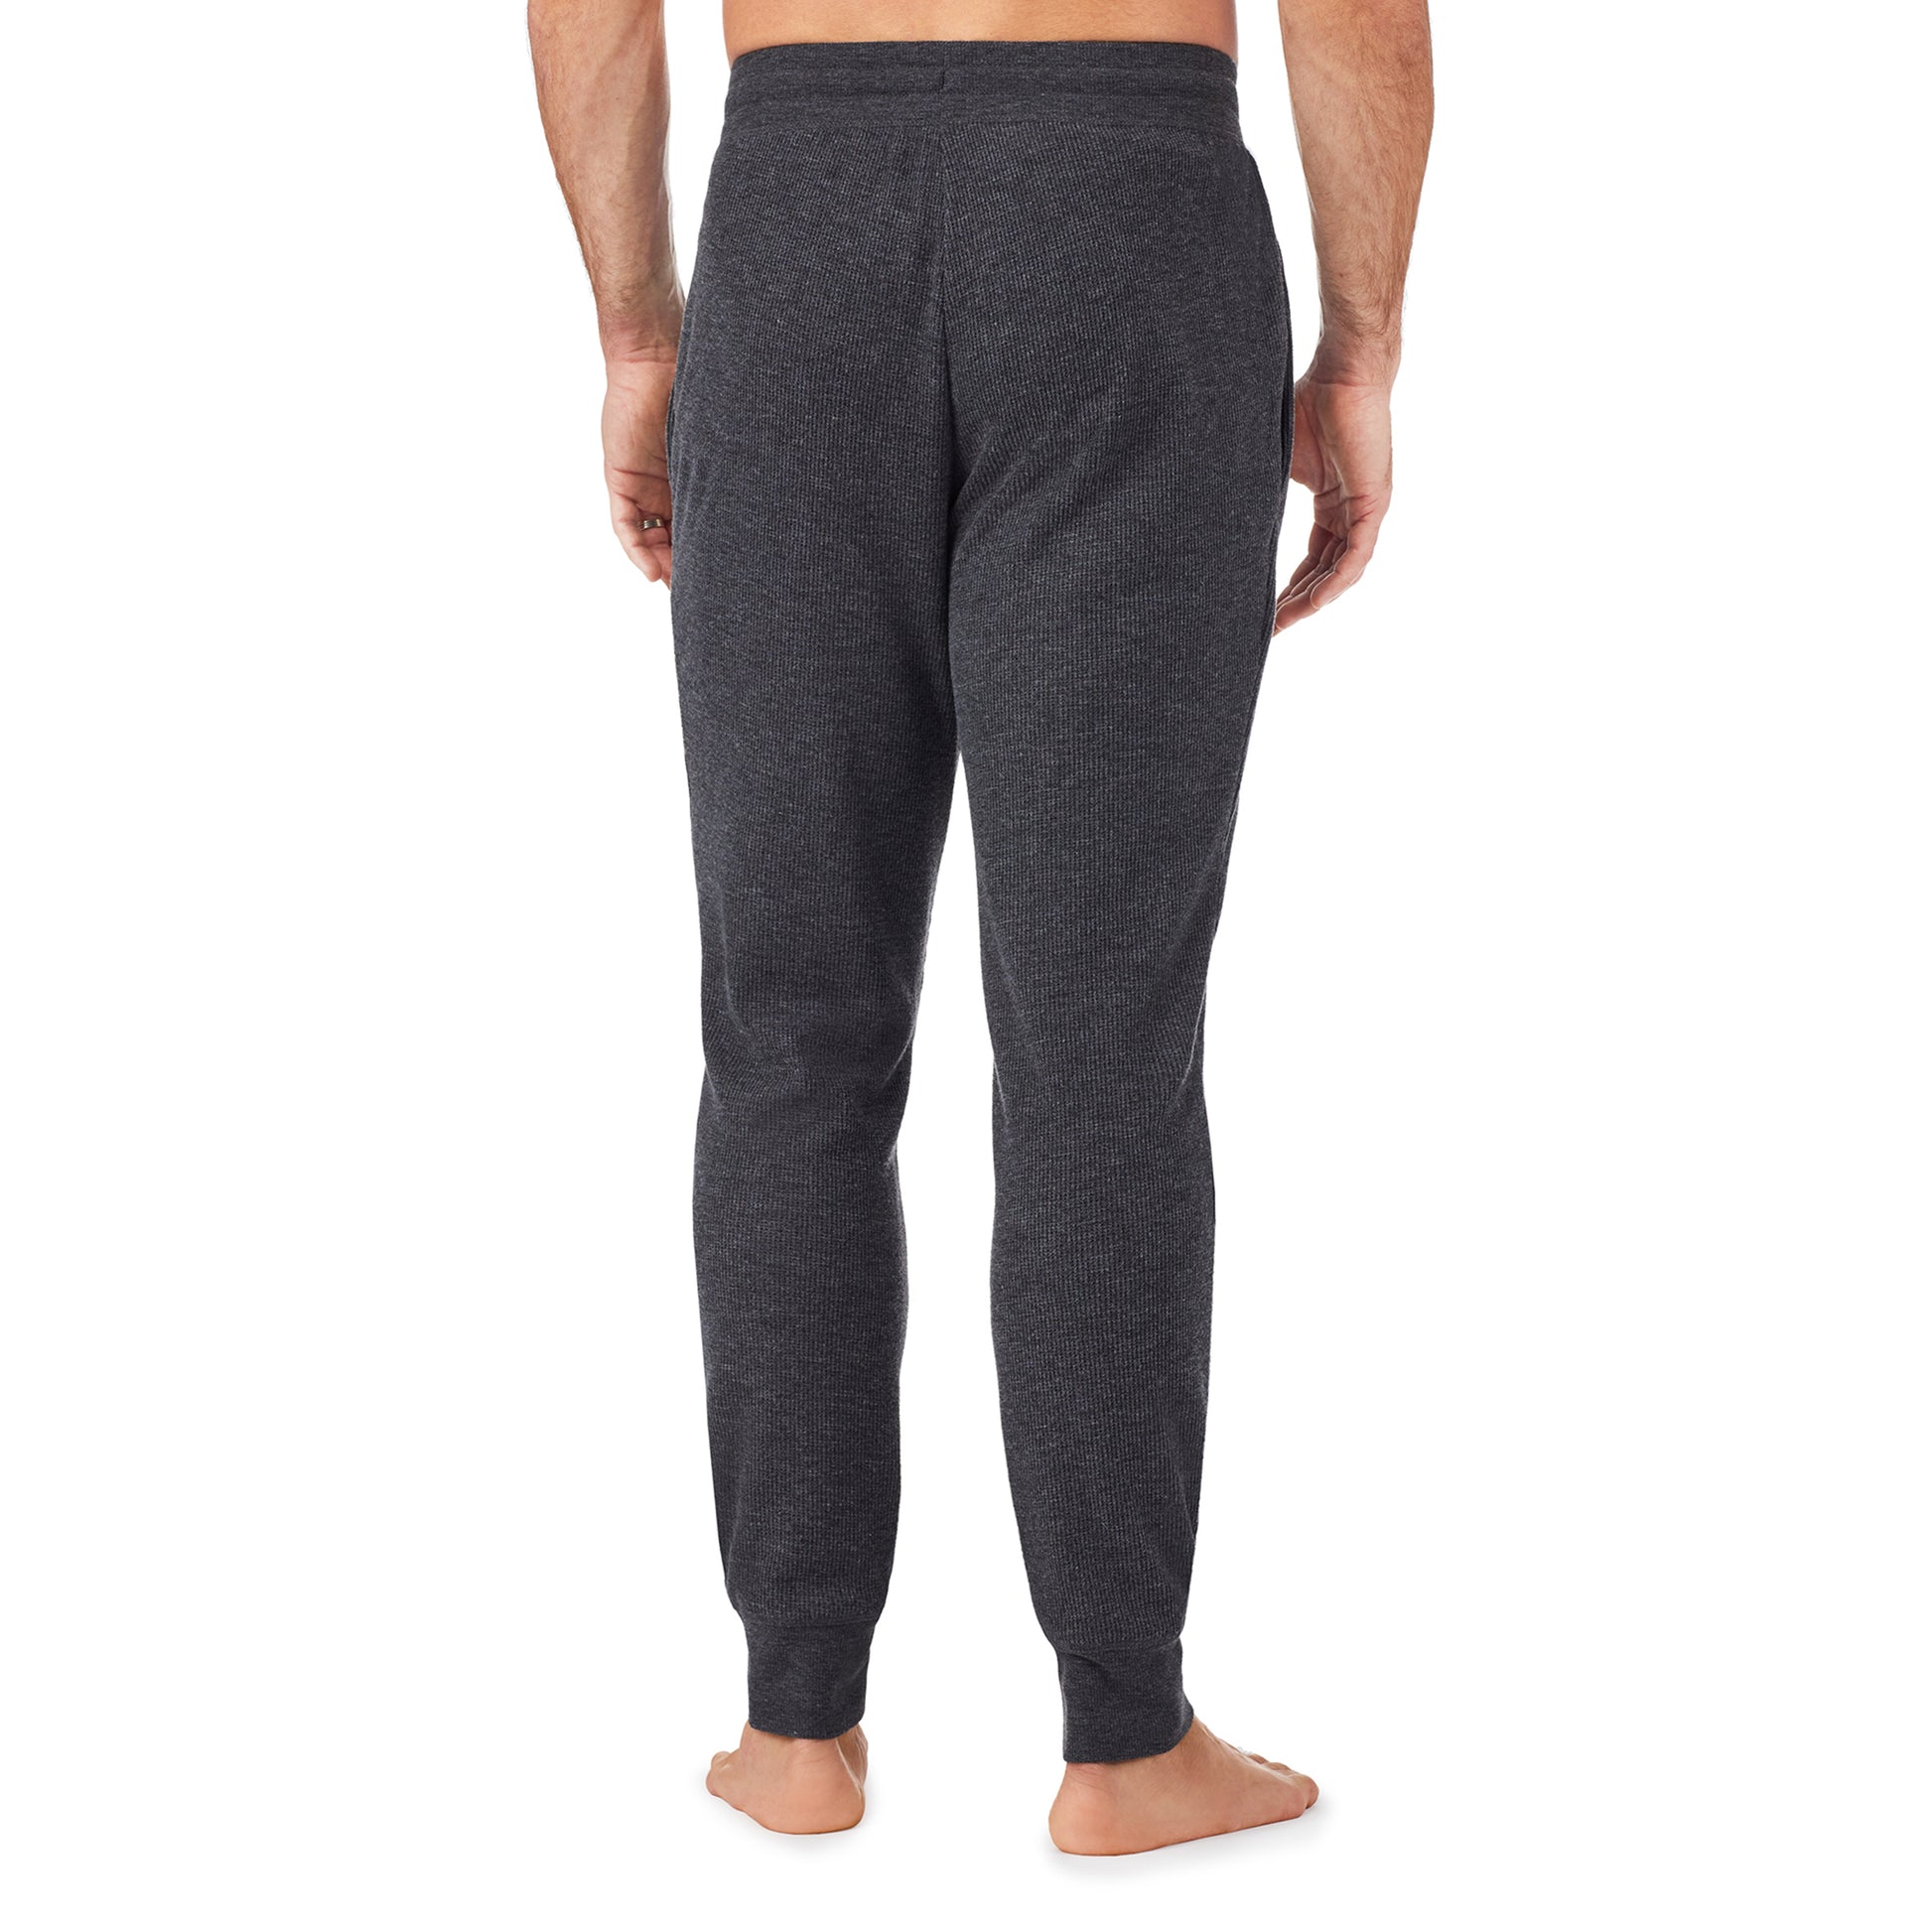 Charcoal Heather; Model is wearing size M. He is 6'1", Waist 31", Inseam 33". @A man wearing a charcoal heather waffle thermal relaxed jogger pant.